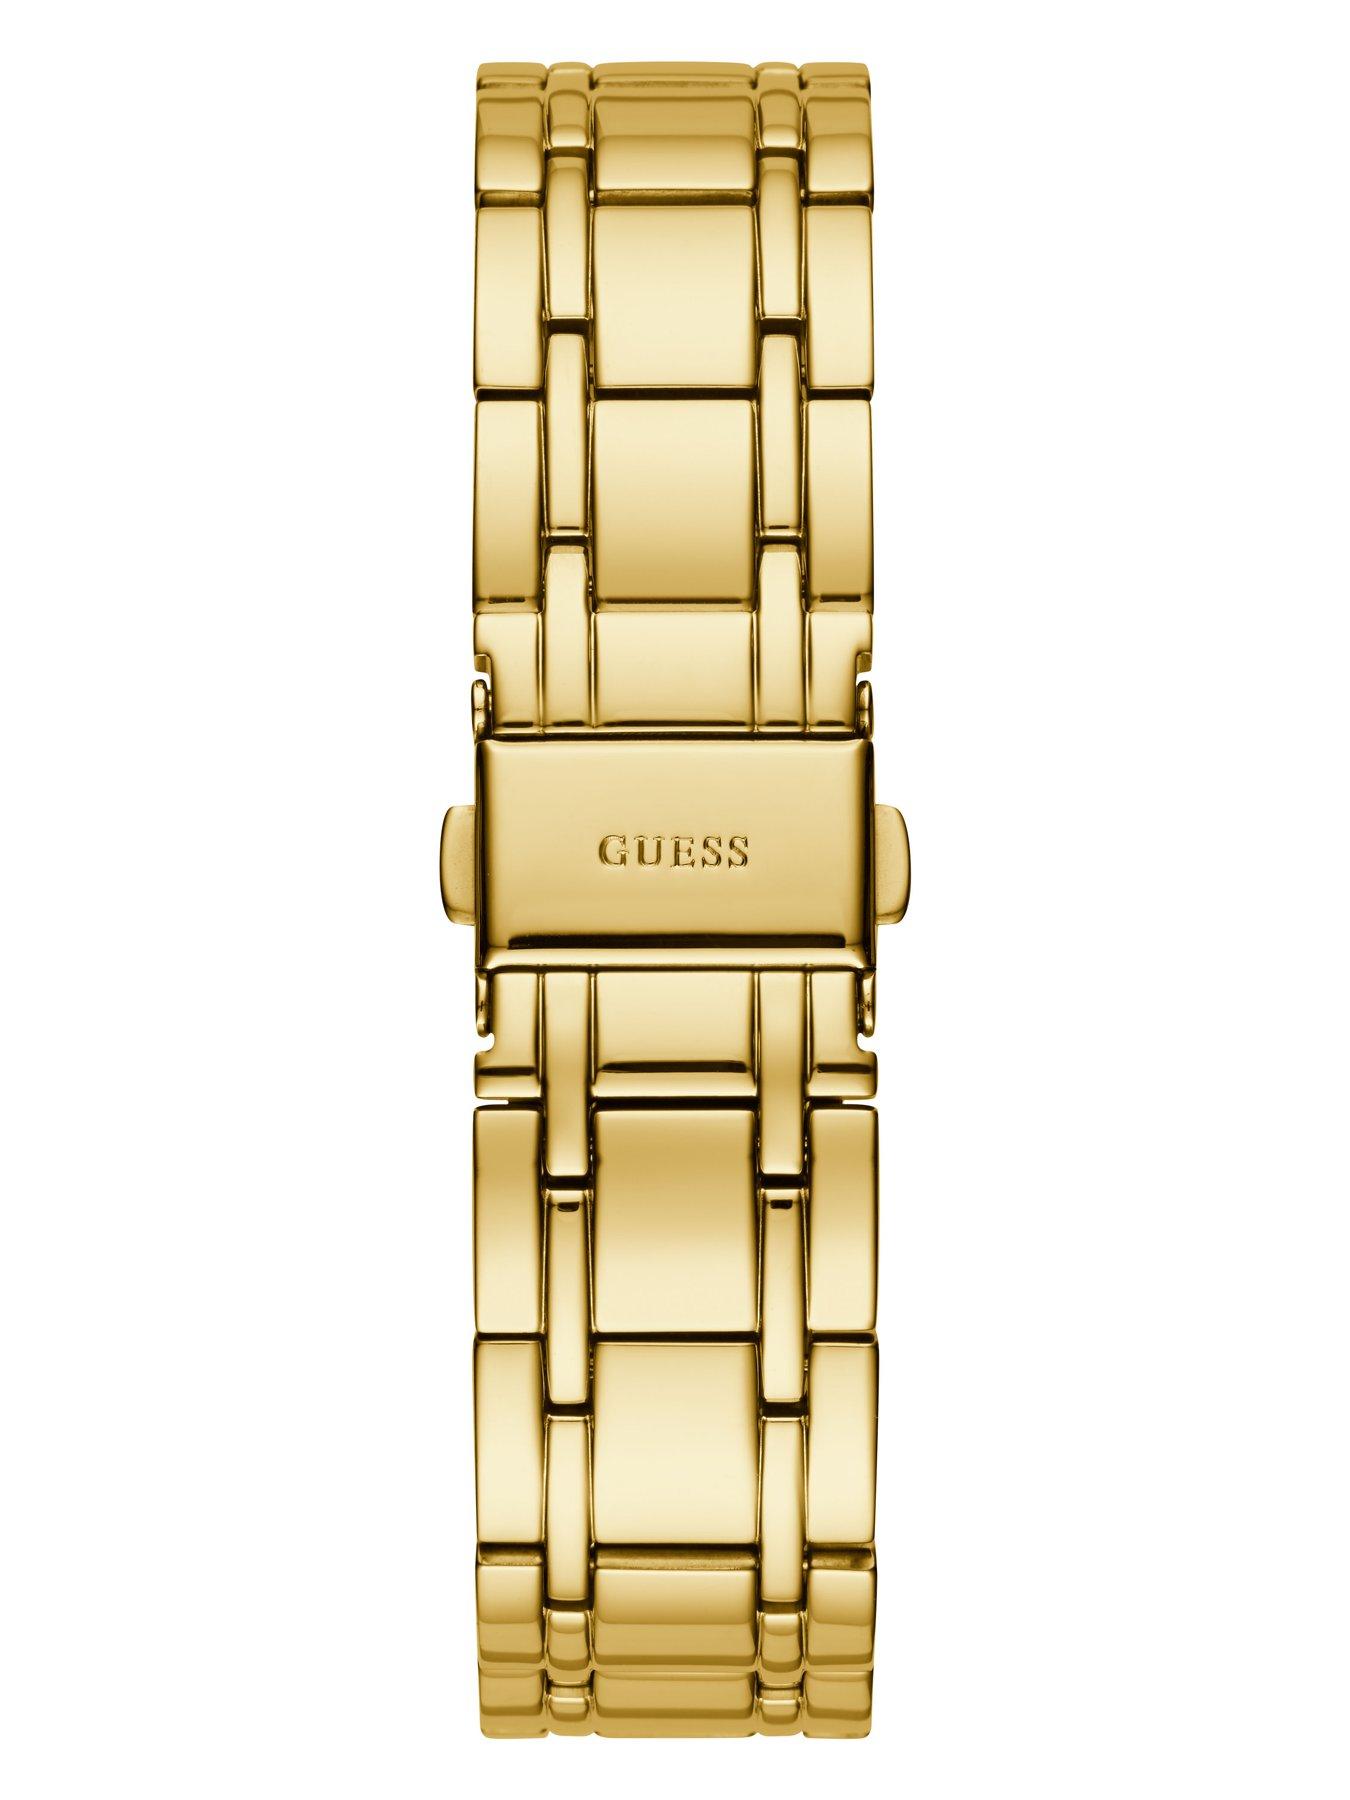  Gold Sunray Dial Gold Stainless Steel Bracelet Ladies Watch